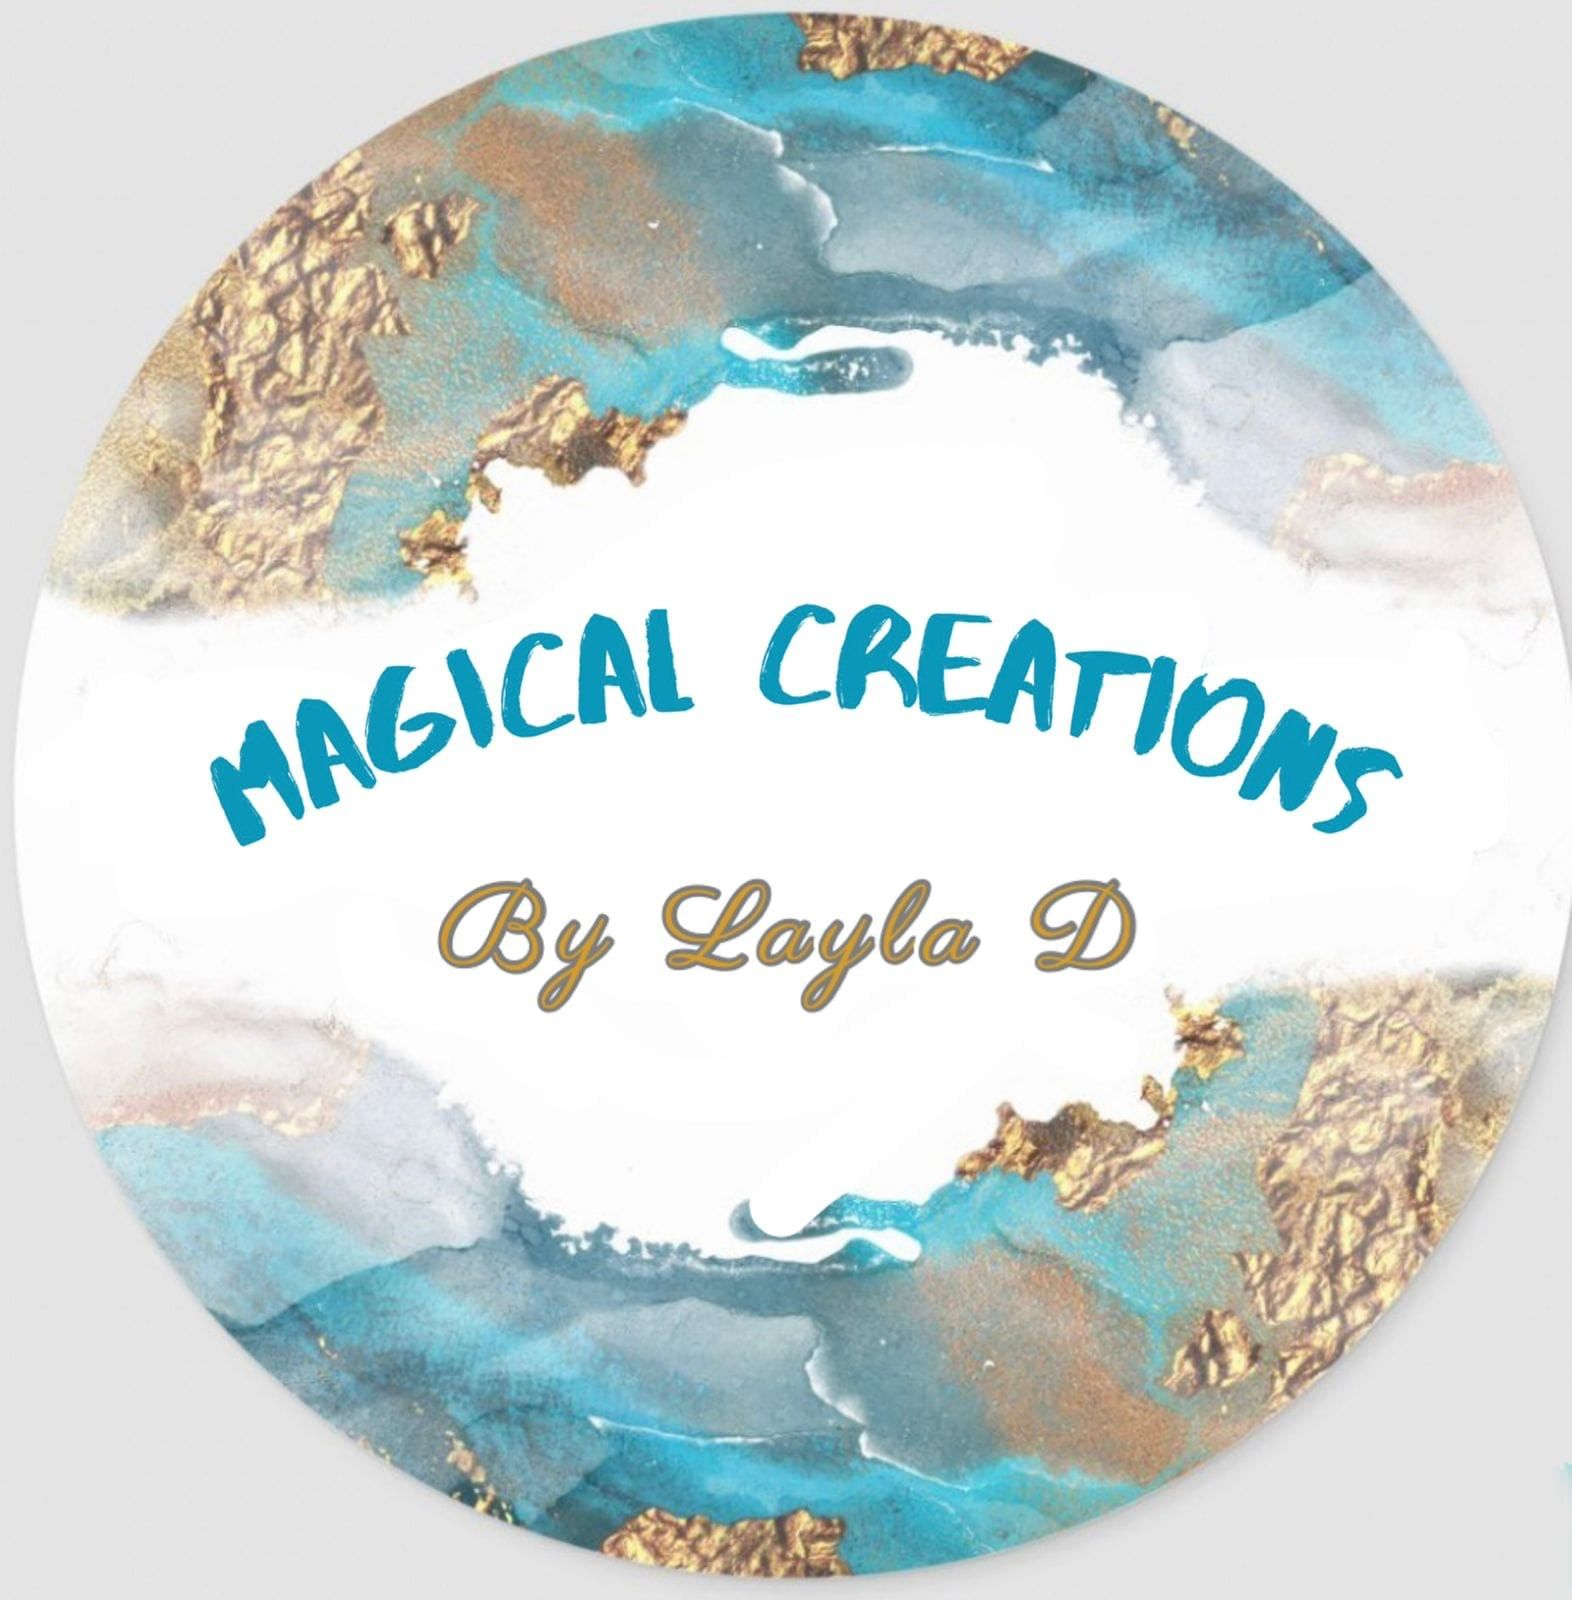 Magical creations by ld